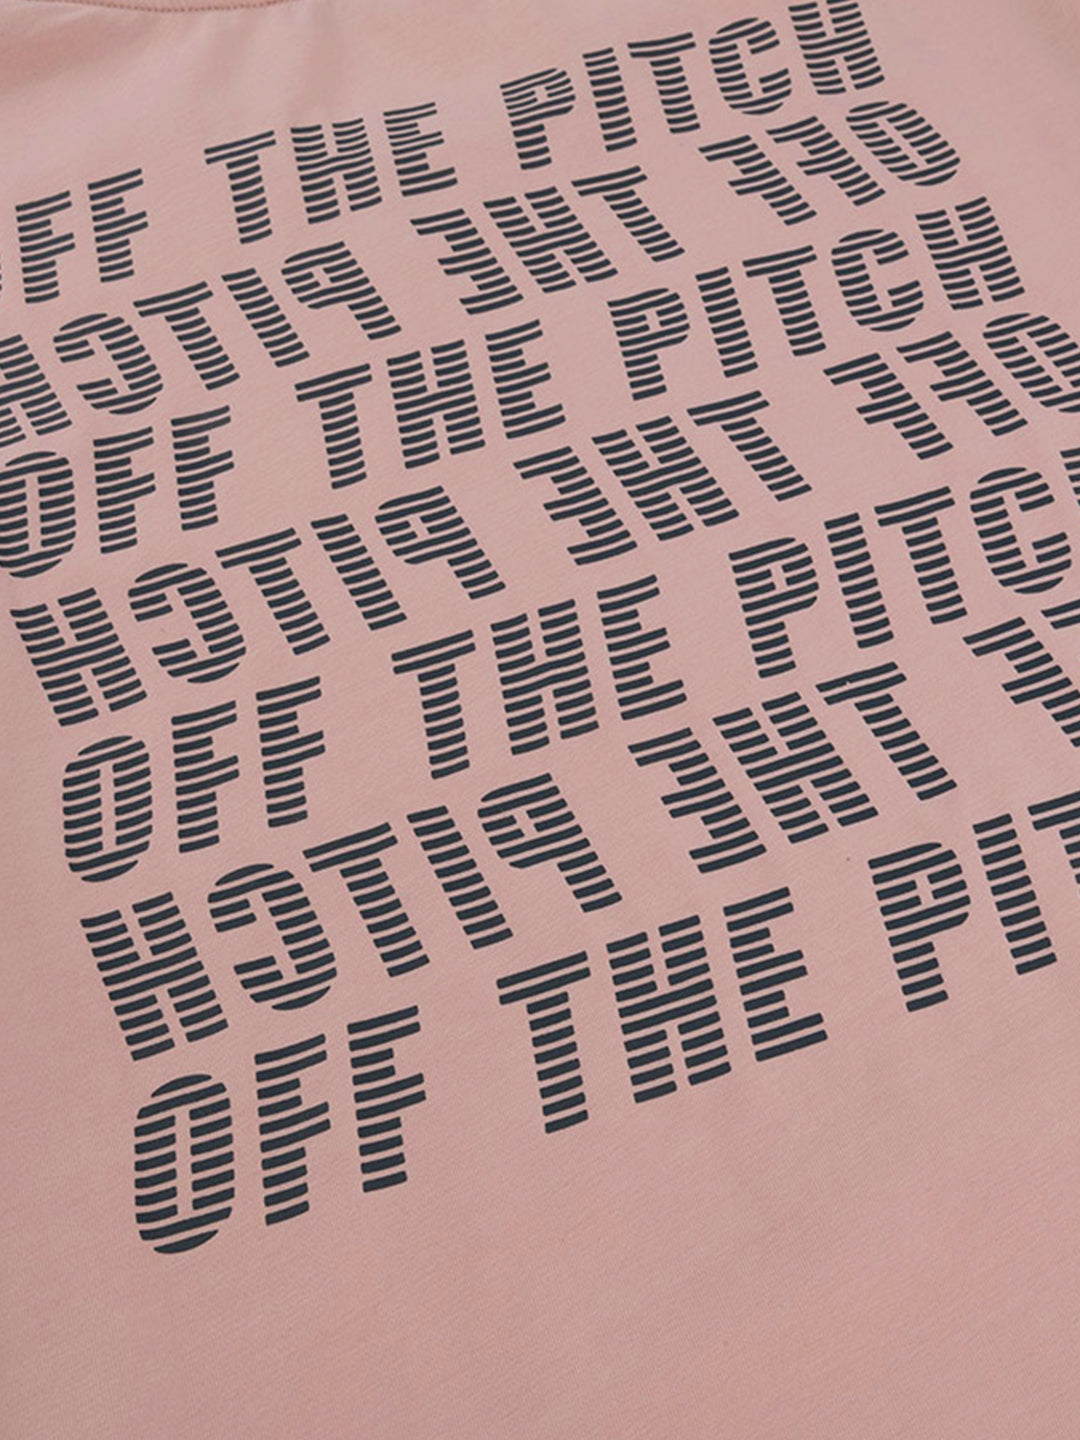 off the pitch t-shirt roze